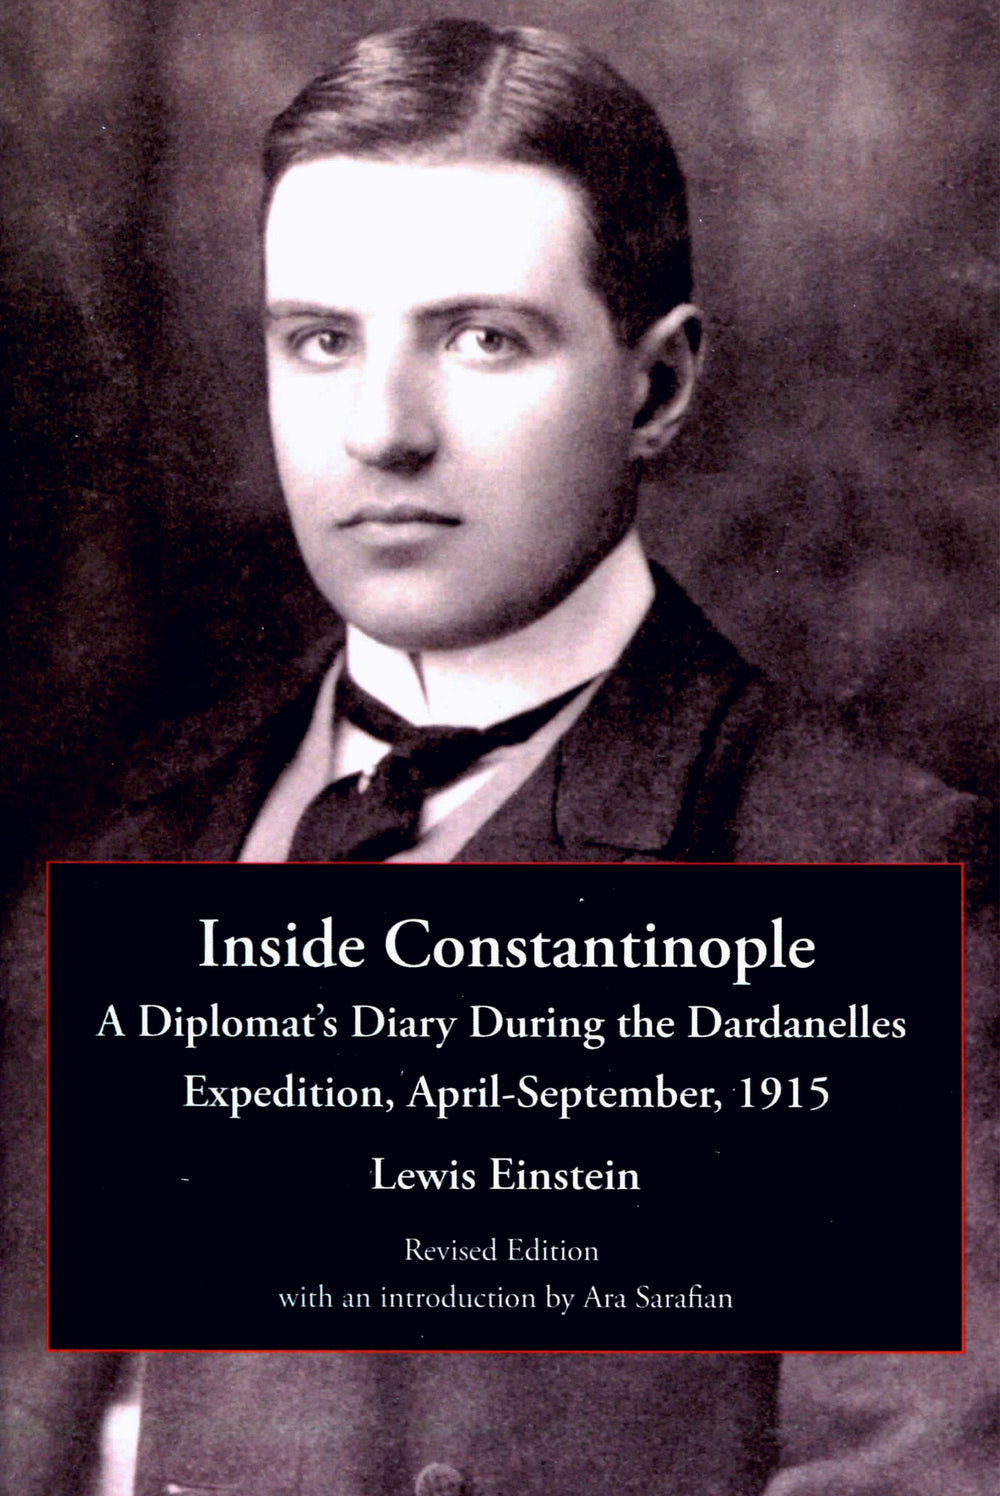 Inside Constantinople: A Diplomat's Diary During the Dardanelles Expedition, April-September, 1915